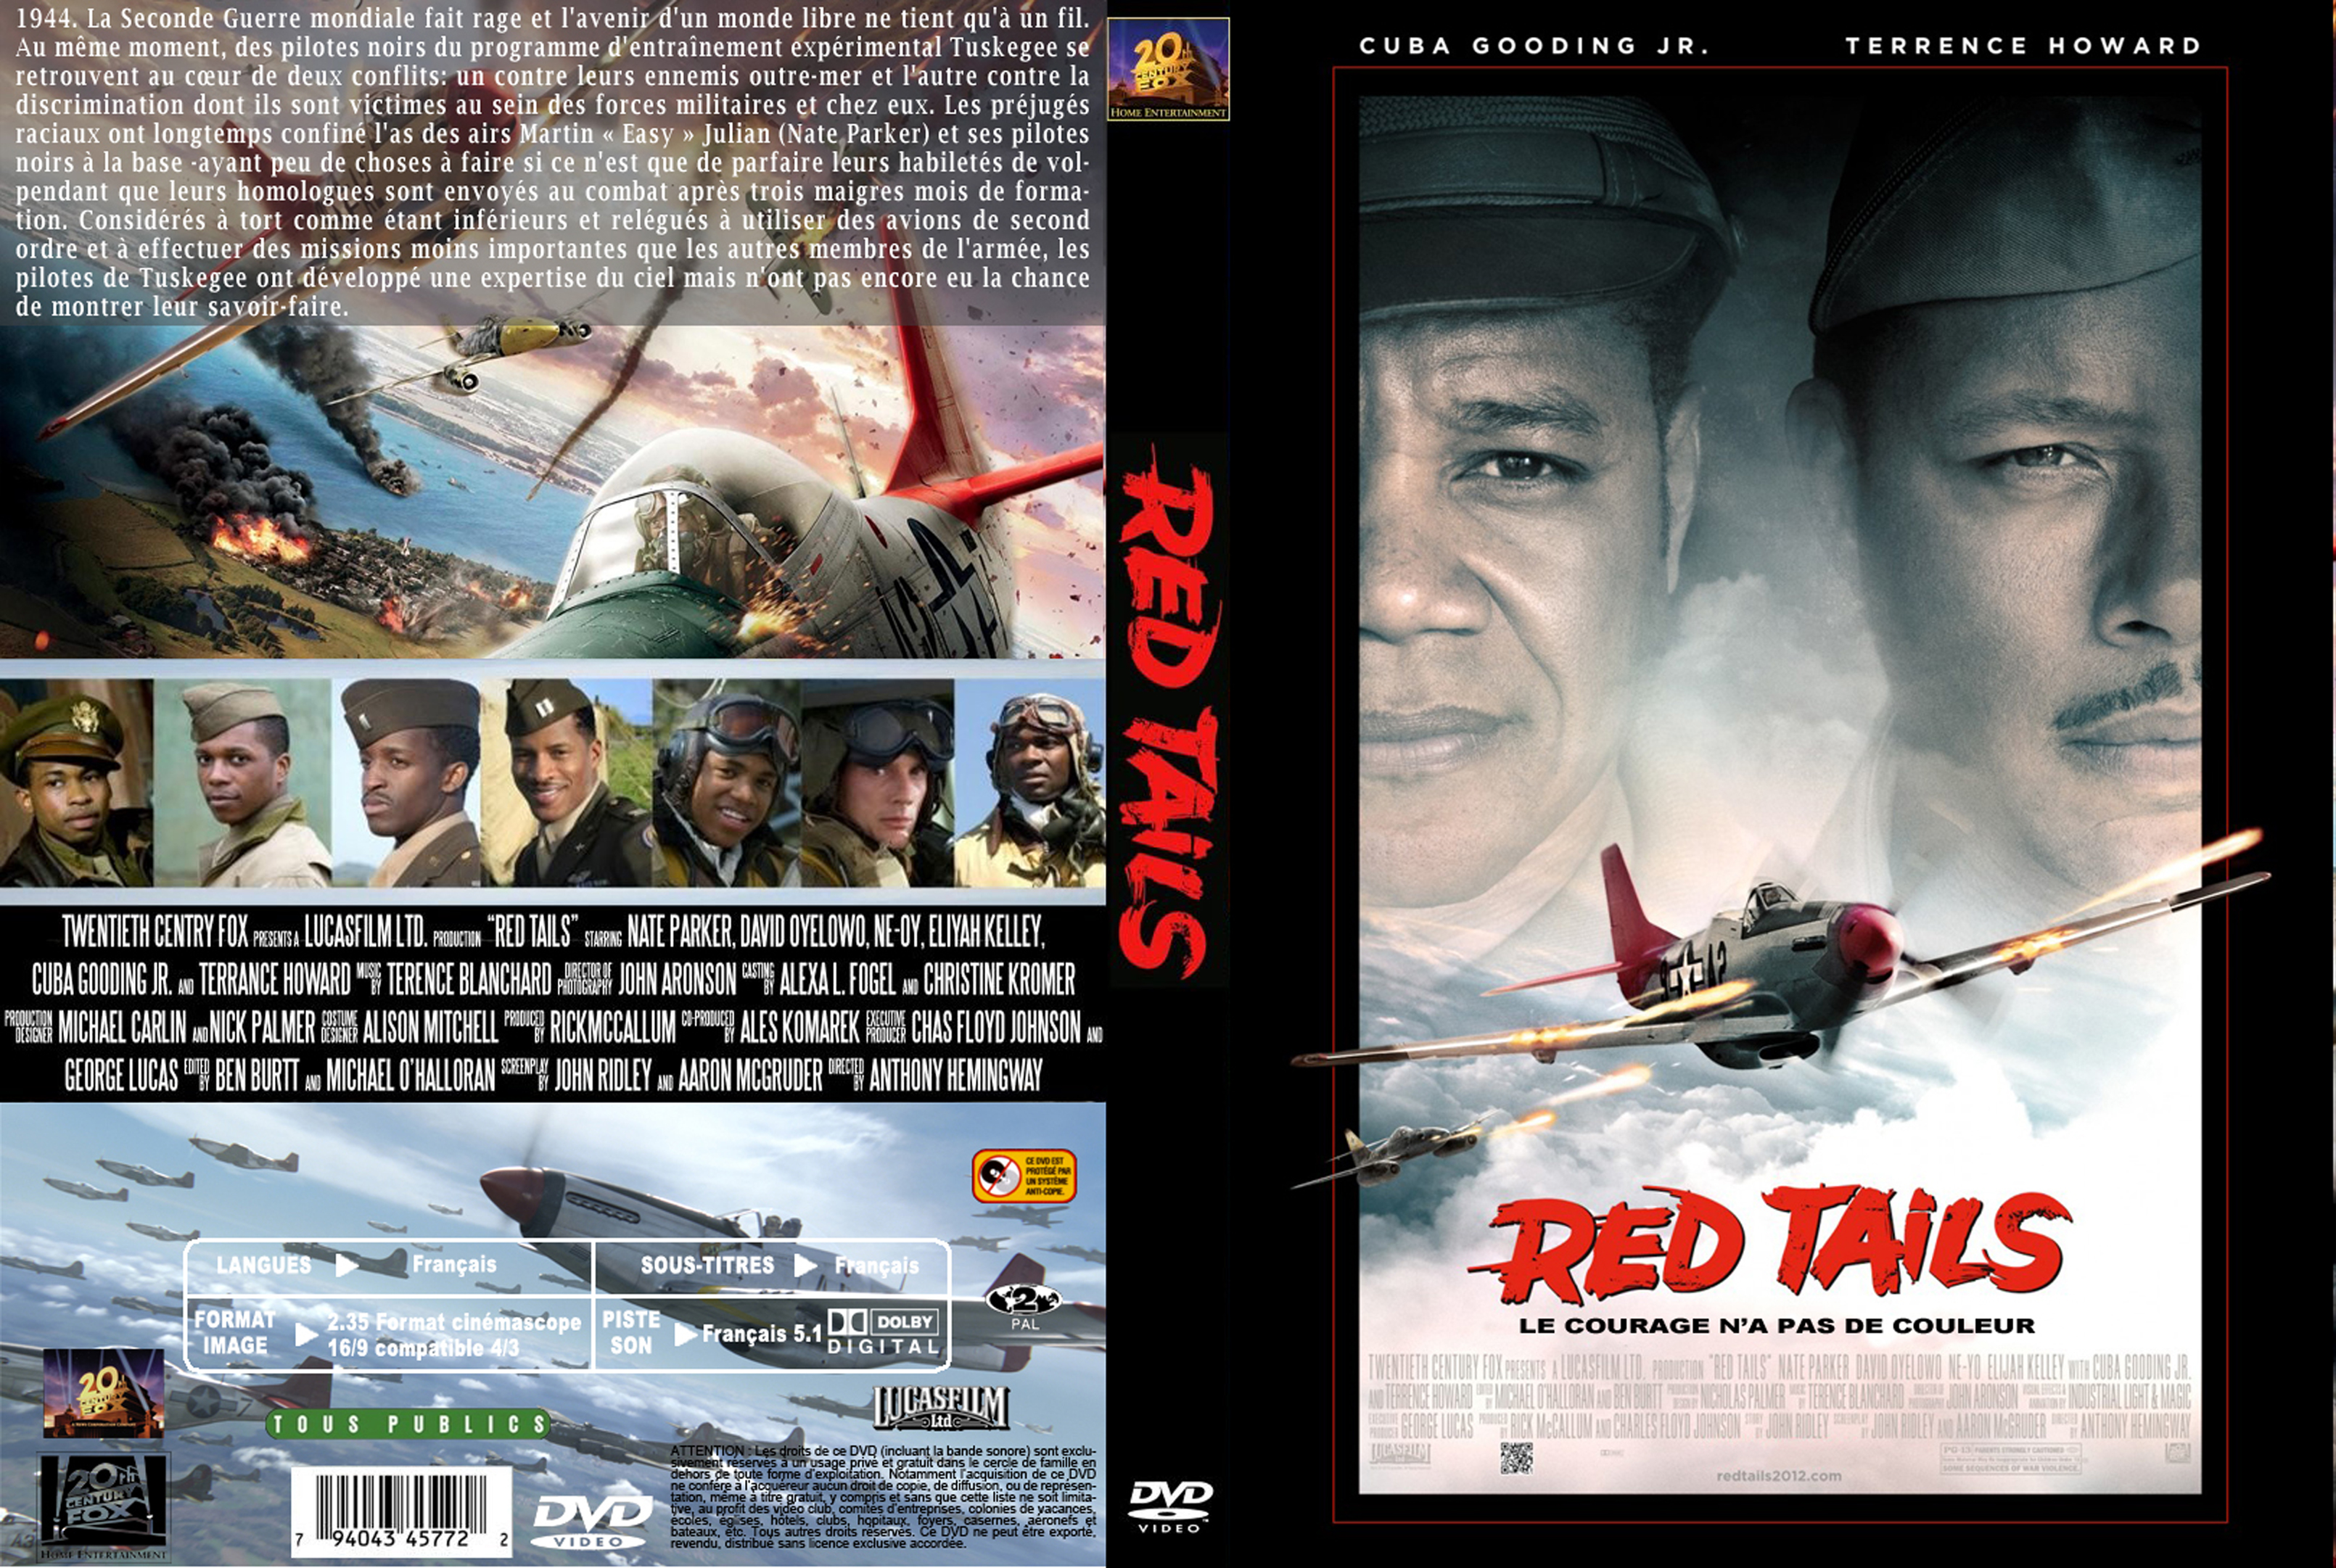 Jaquette DVD Red Tails custom